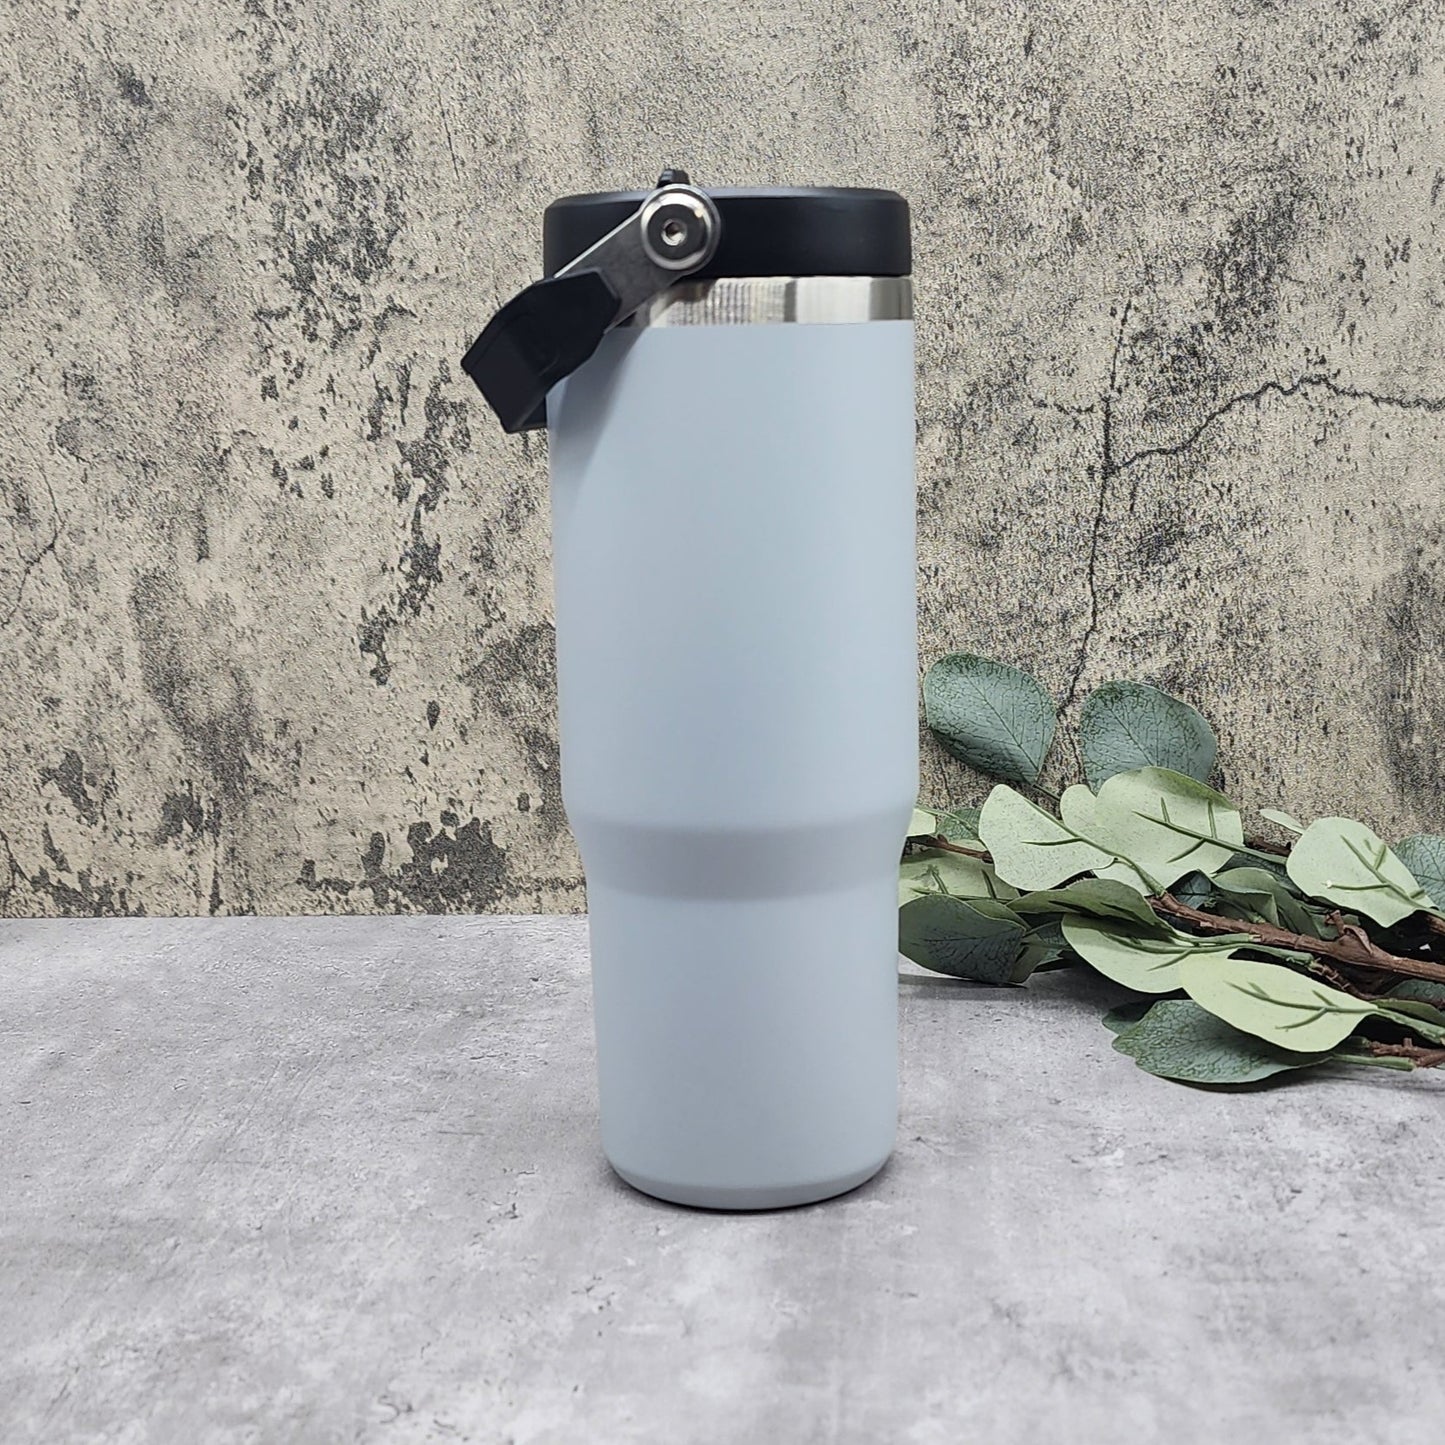 Powder Coated Sports Bottle With Top Handle